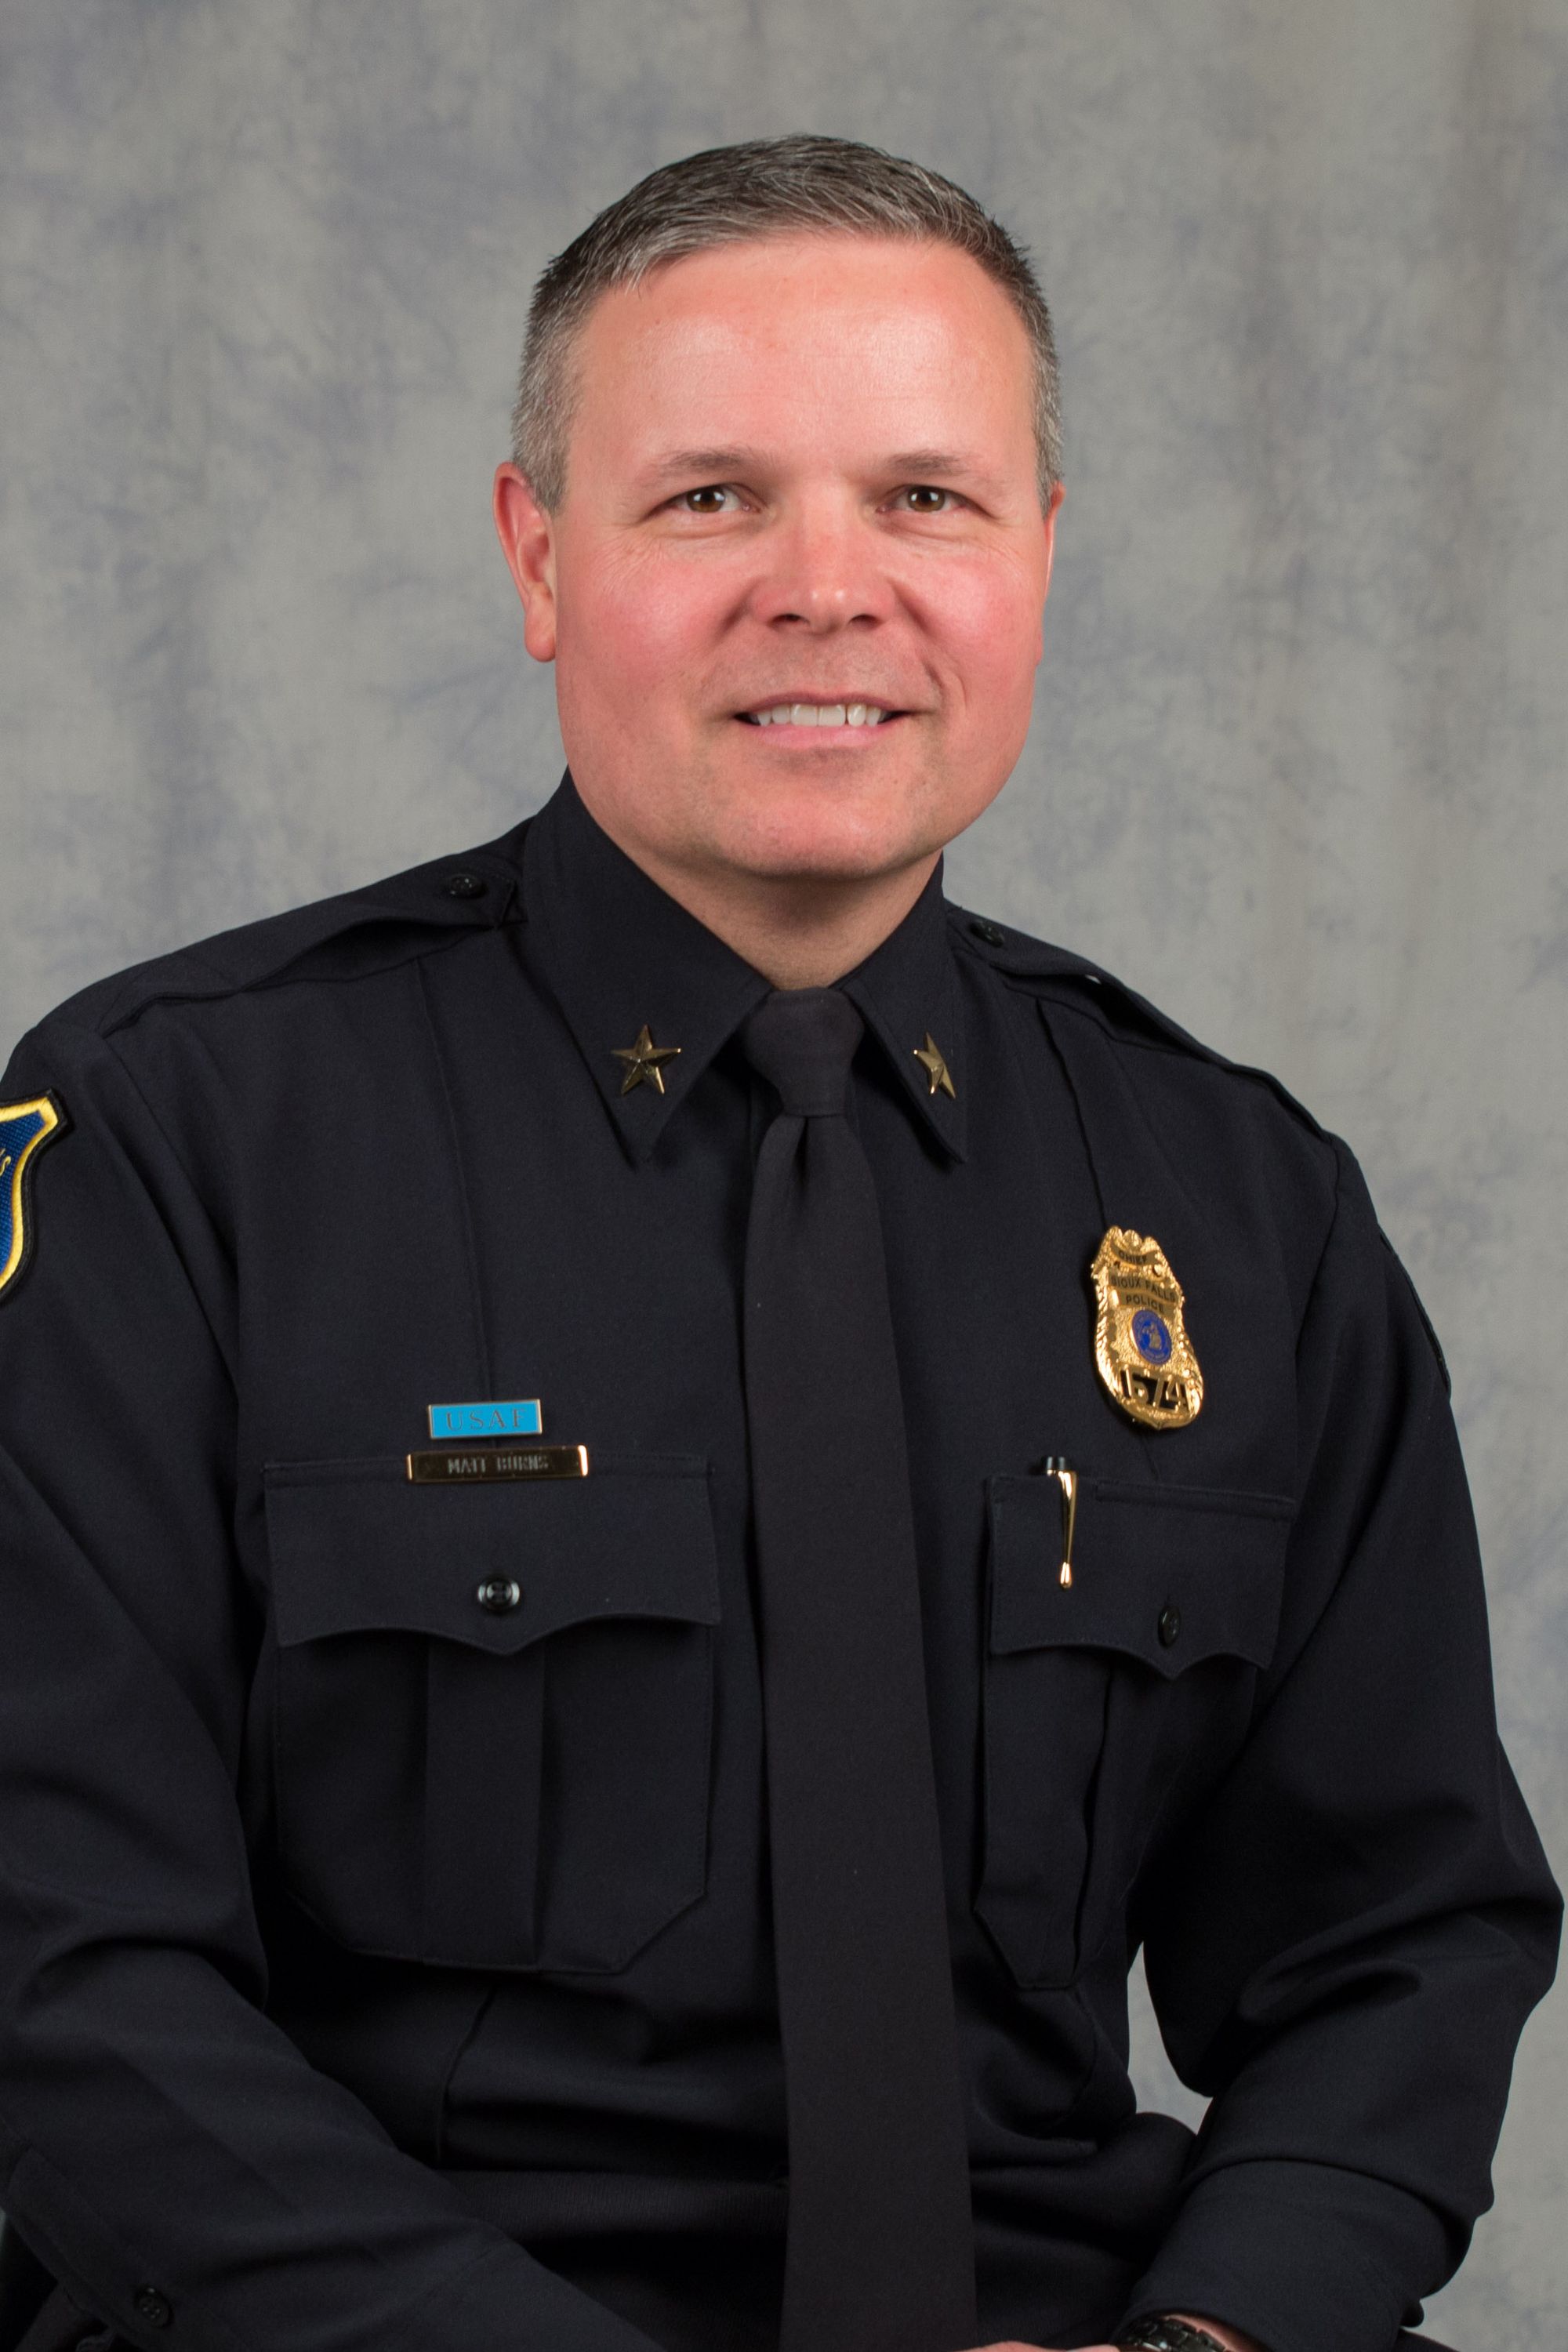 What to know about Matt Burns' tenure as Sioux Falls Police Chief